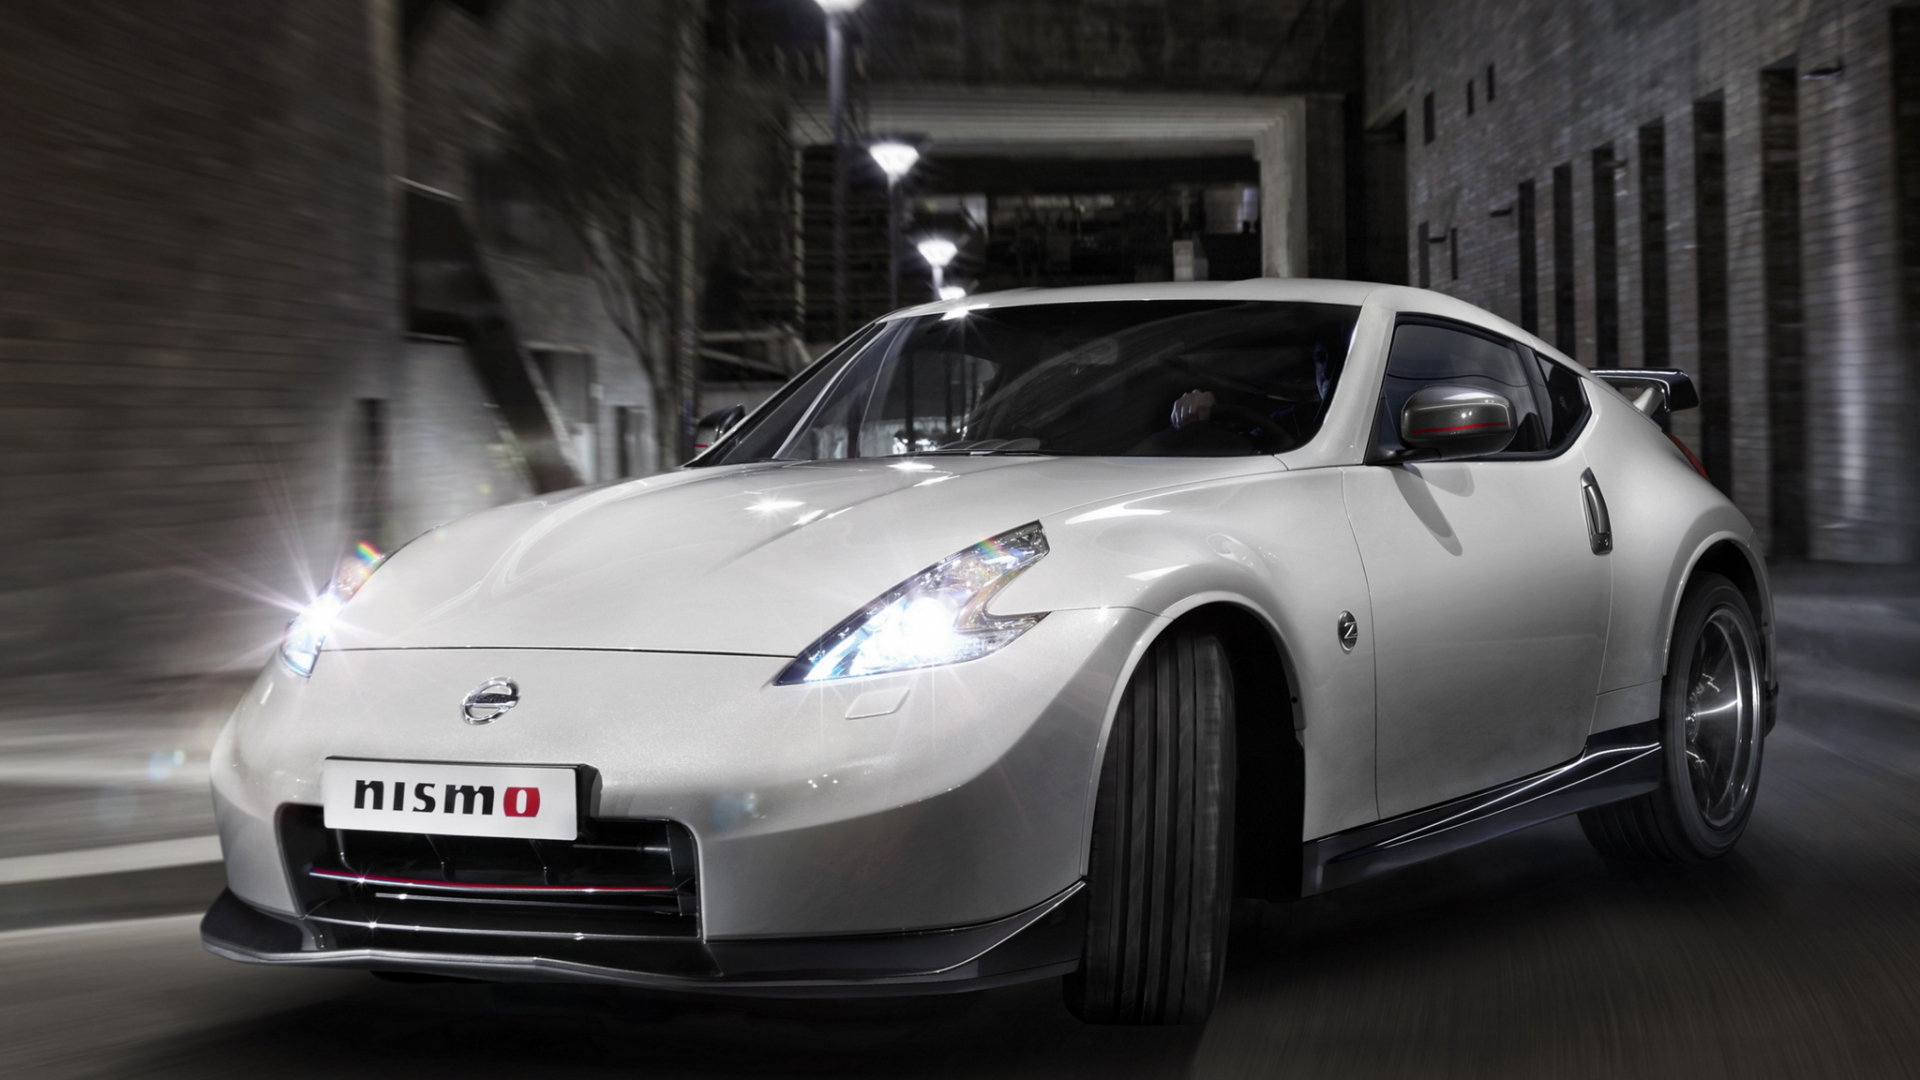 1920x1080 Free download Blue 370z Nismo Wallpaper Viewing Gallery [2048x1536] for your Desktop, Mobile \u0026 Tablet | Explore 72+ 370z Nismo Wallpaper | Nissan 370z Wallpaper, Nissan 370Z Wallpapers HD, 370Z Pictures Wallpaper